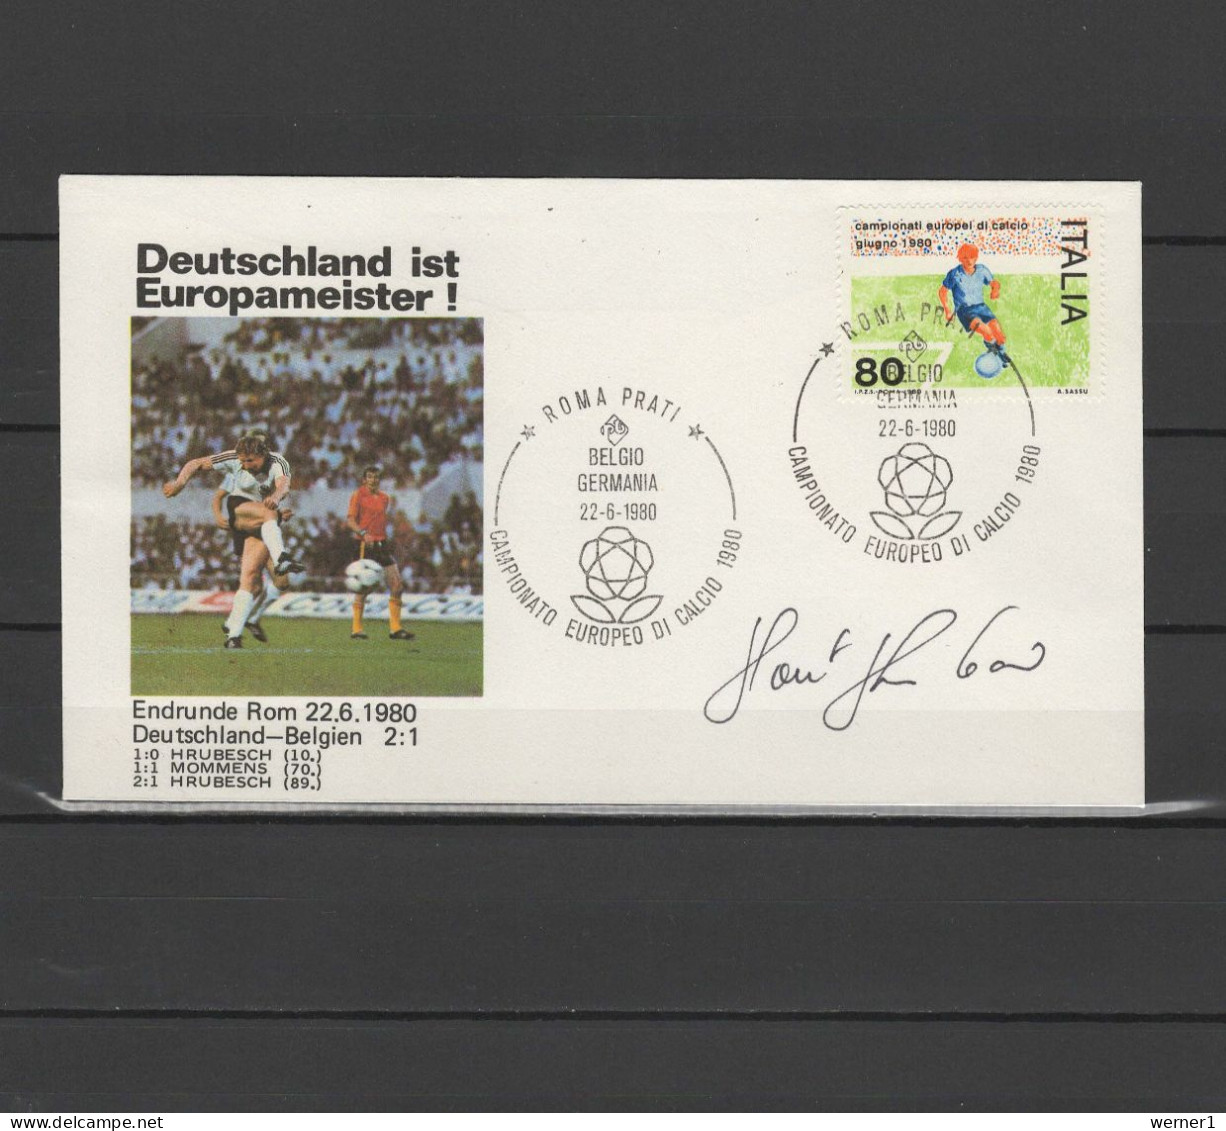 Italy 1980 Football Soccer European Championship Commemorative Cover With Signature Of Horst Hrubesch - Eurocopa (UEFA)